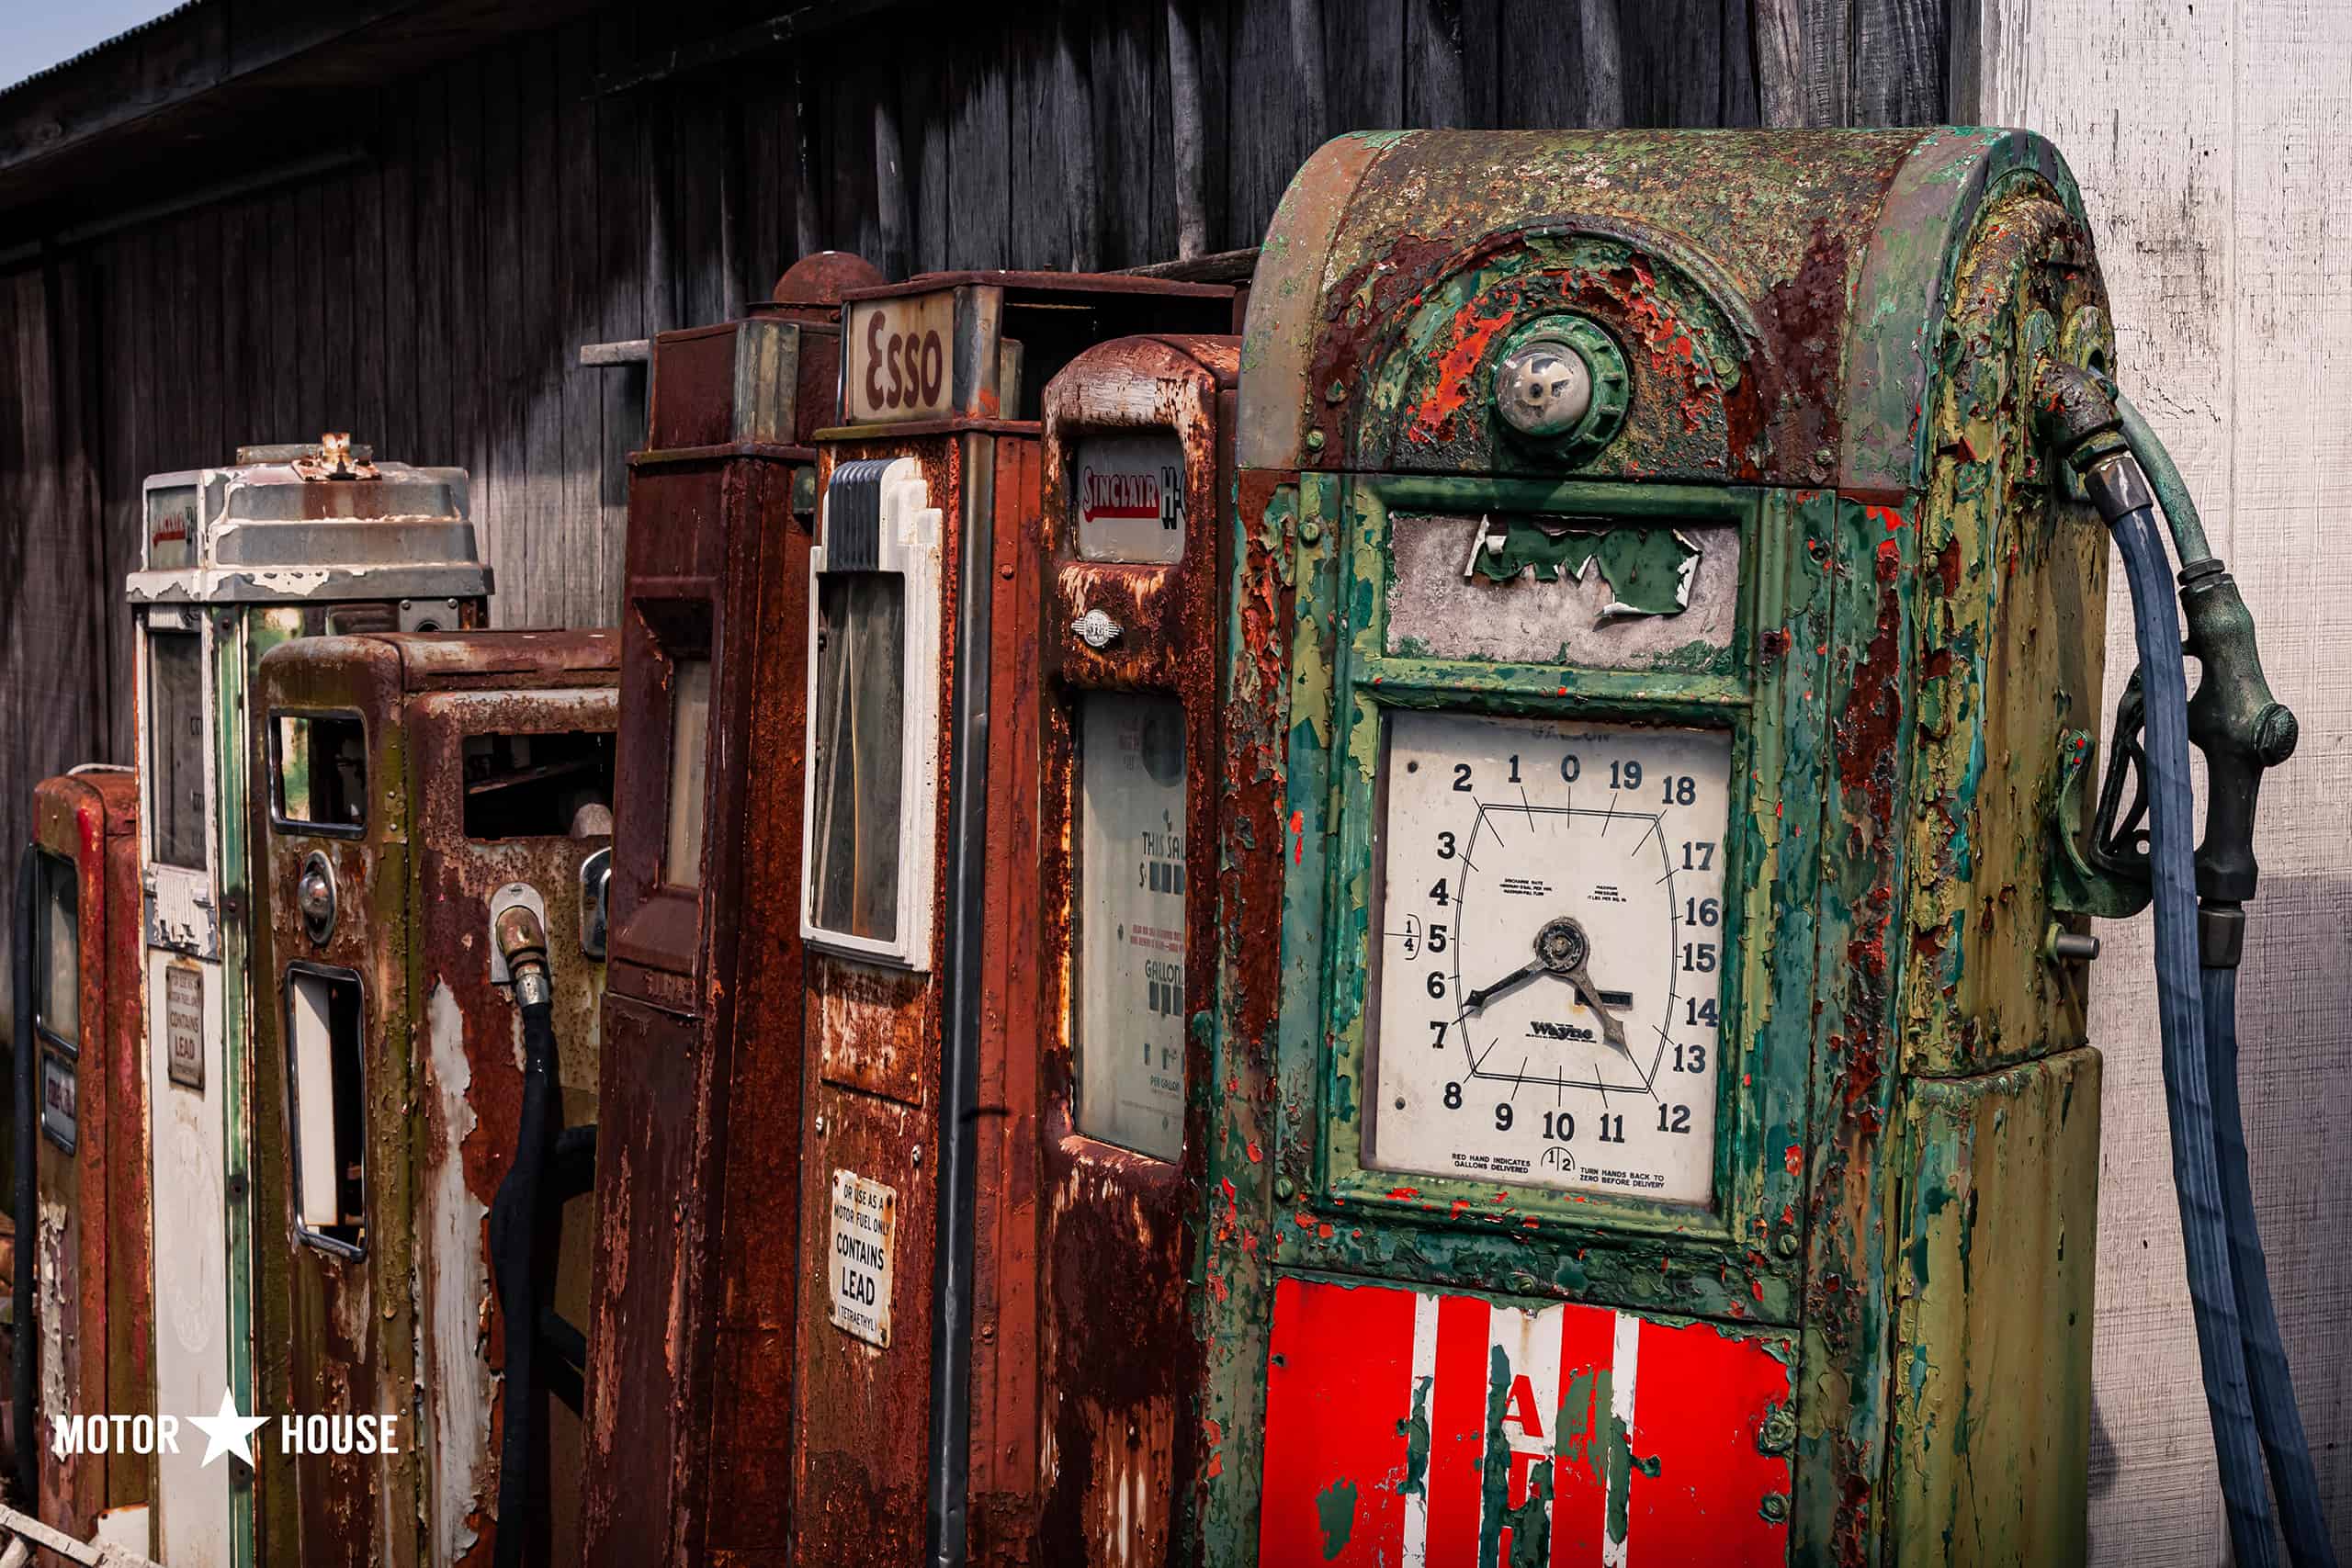 Gas Pump collection in rural Nj